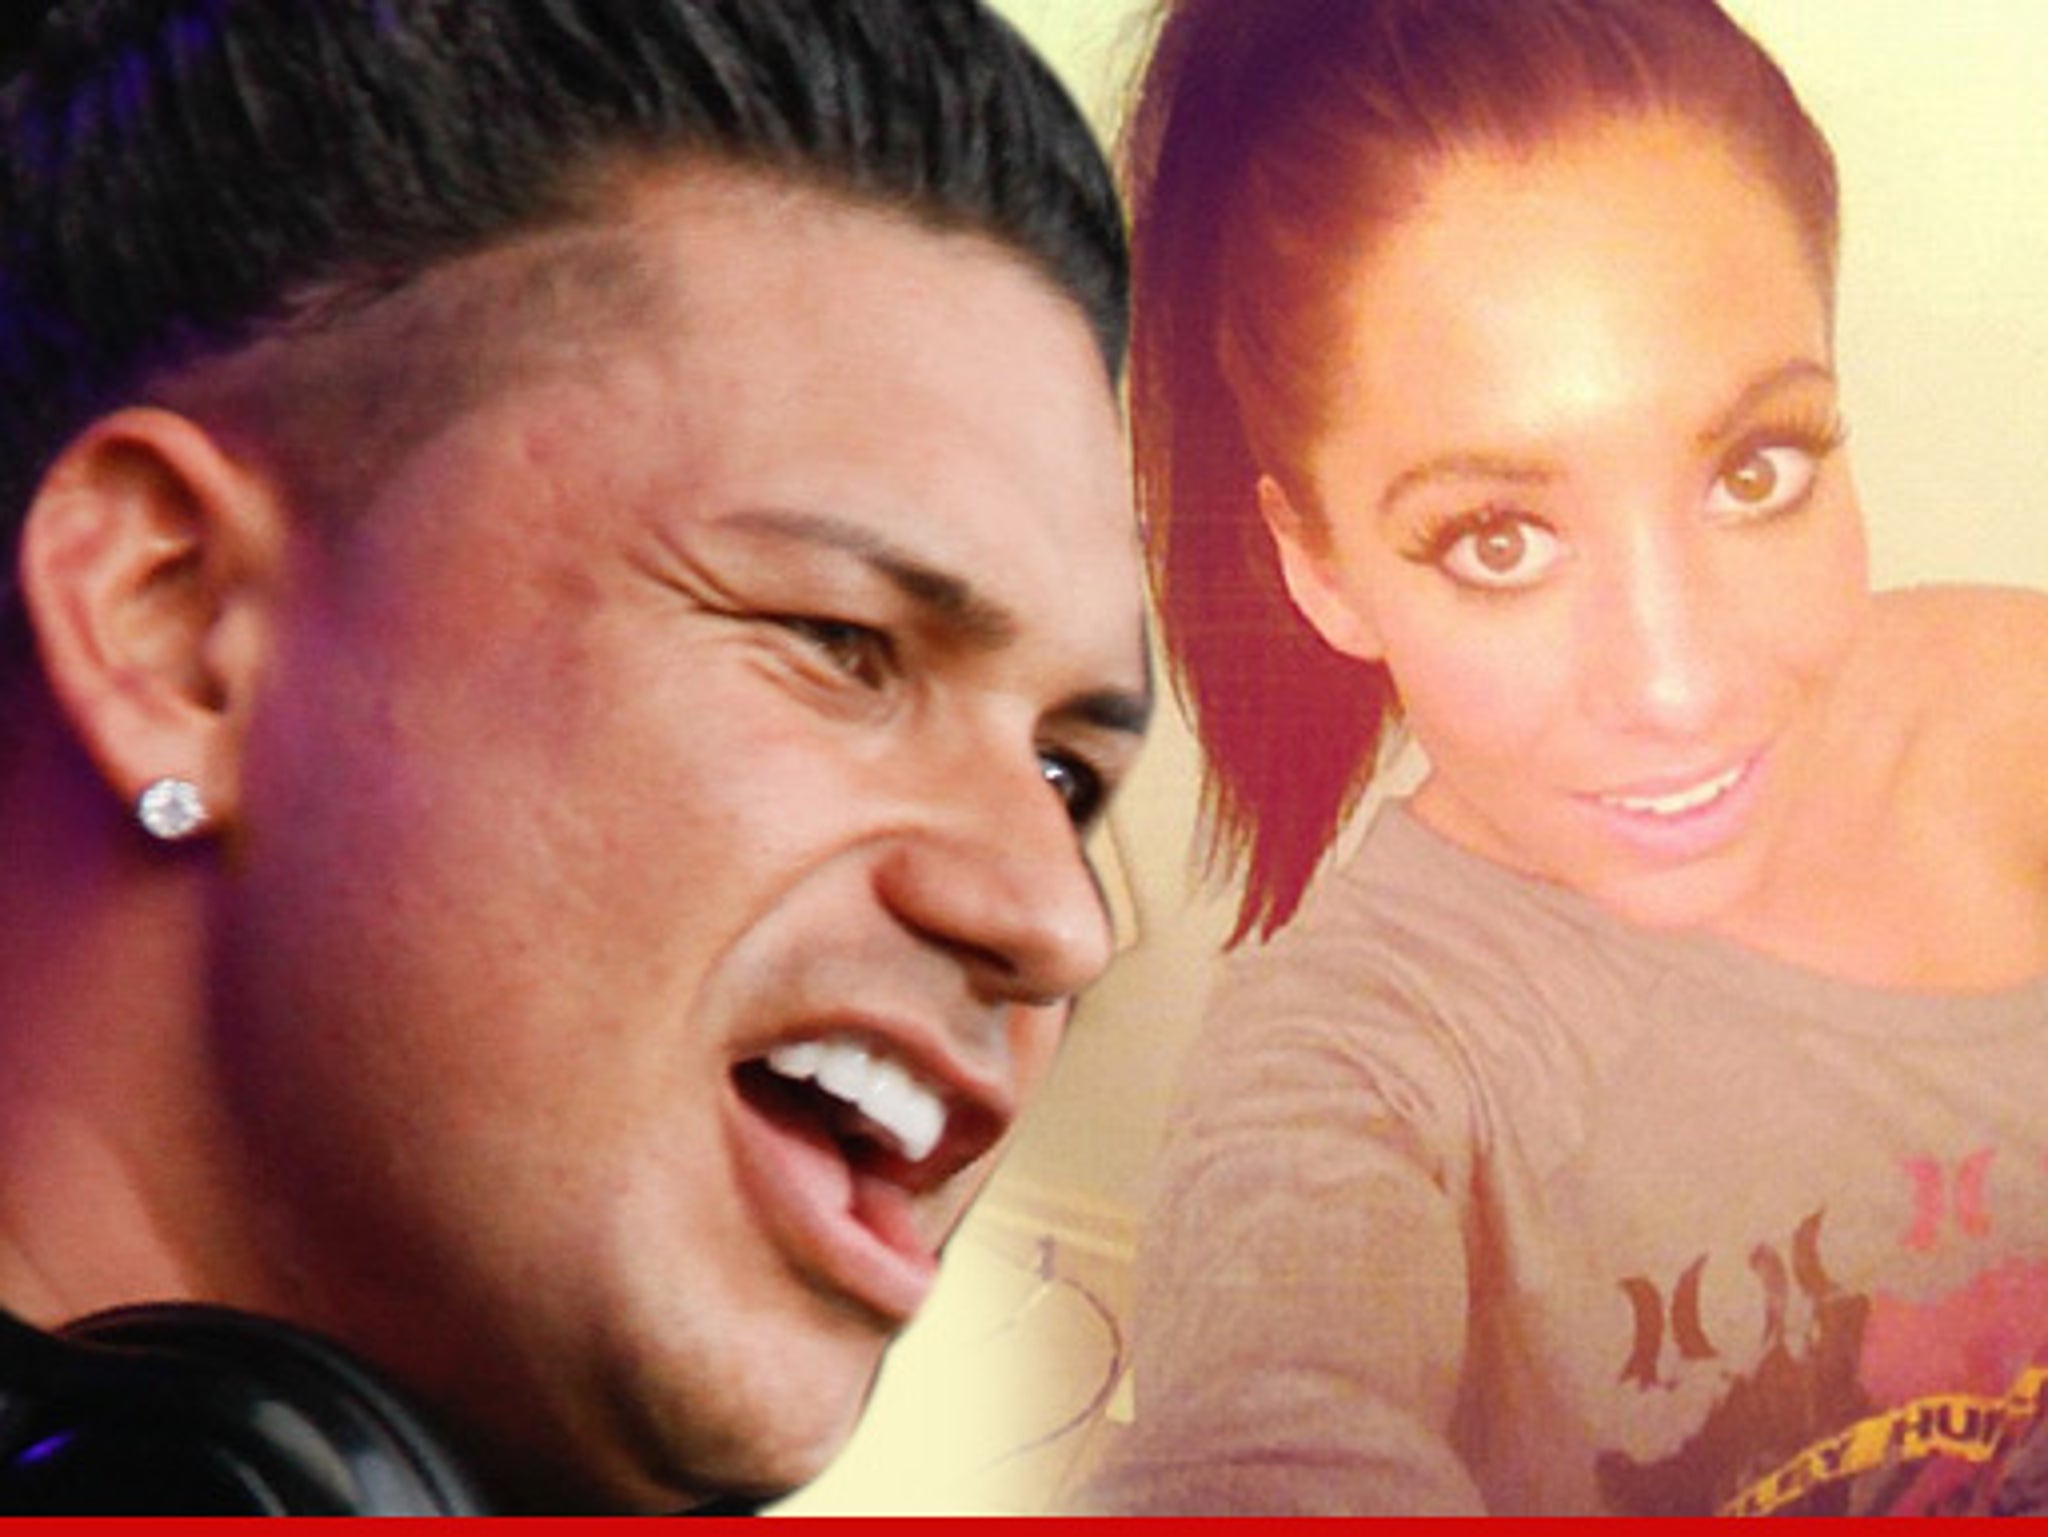 Pauly D Calls Baby Daughter a Blessing